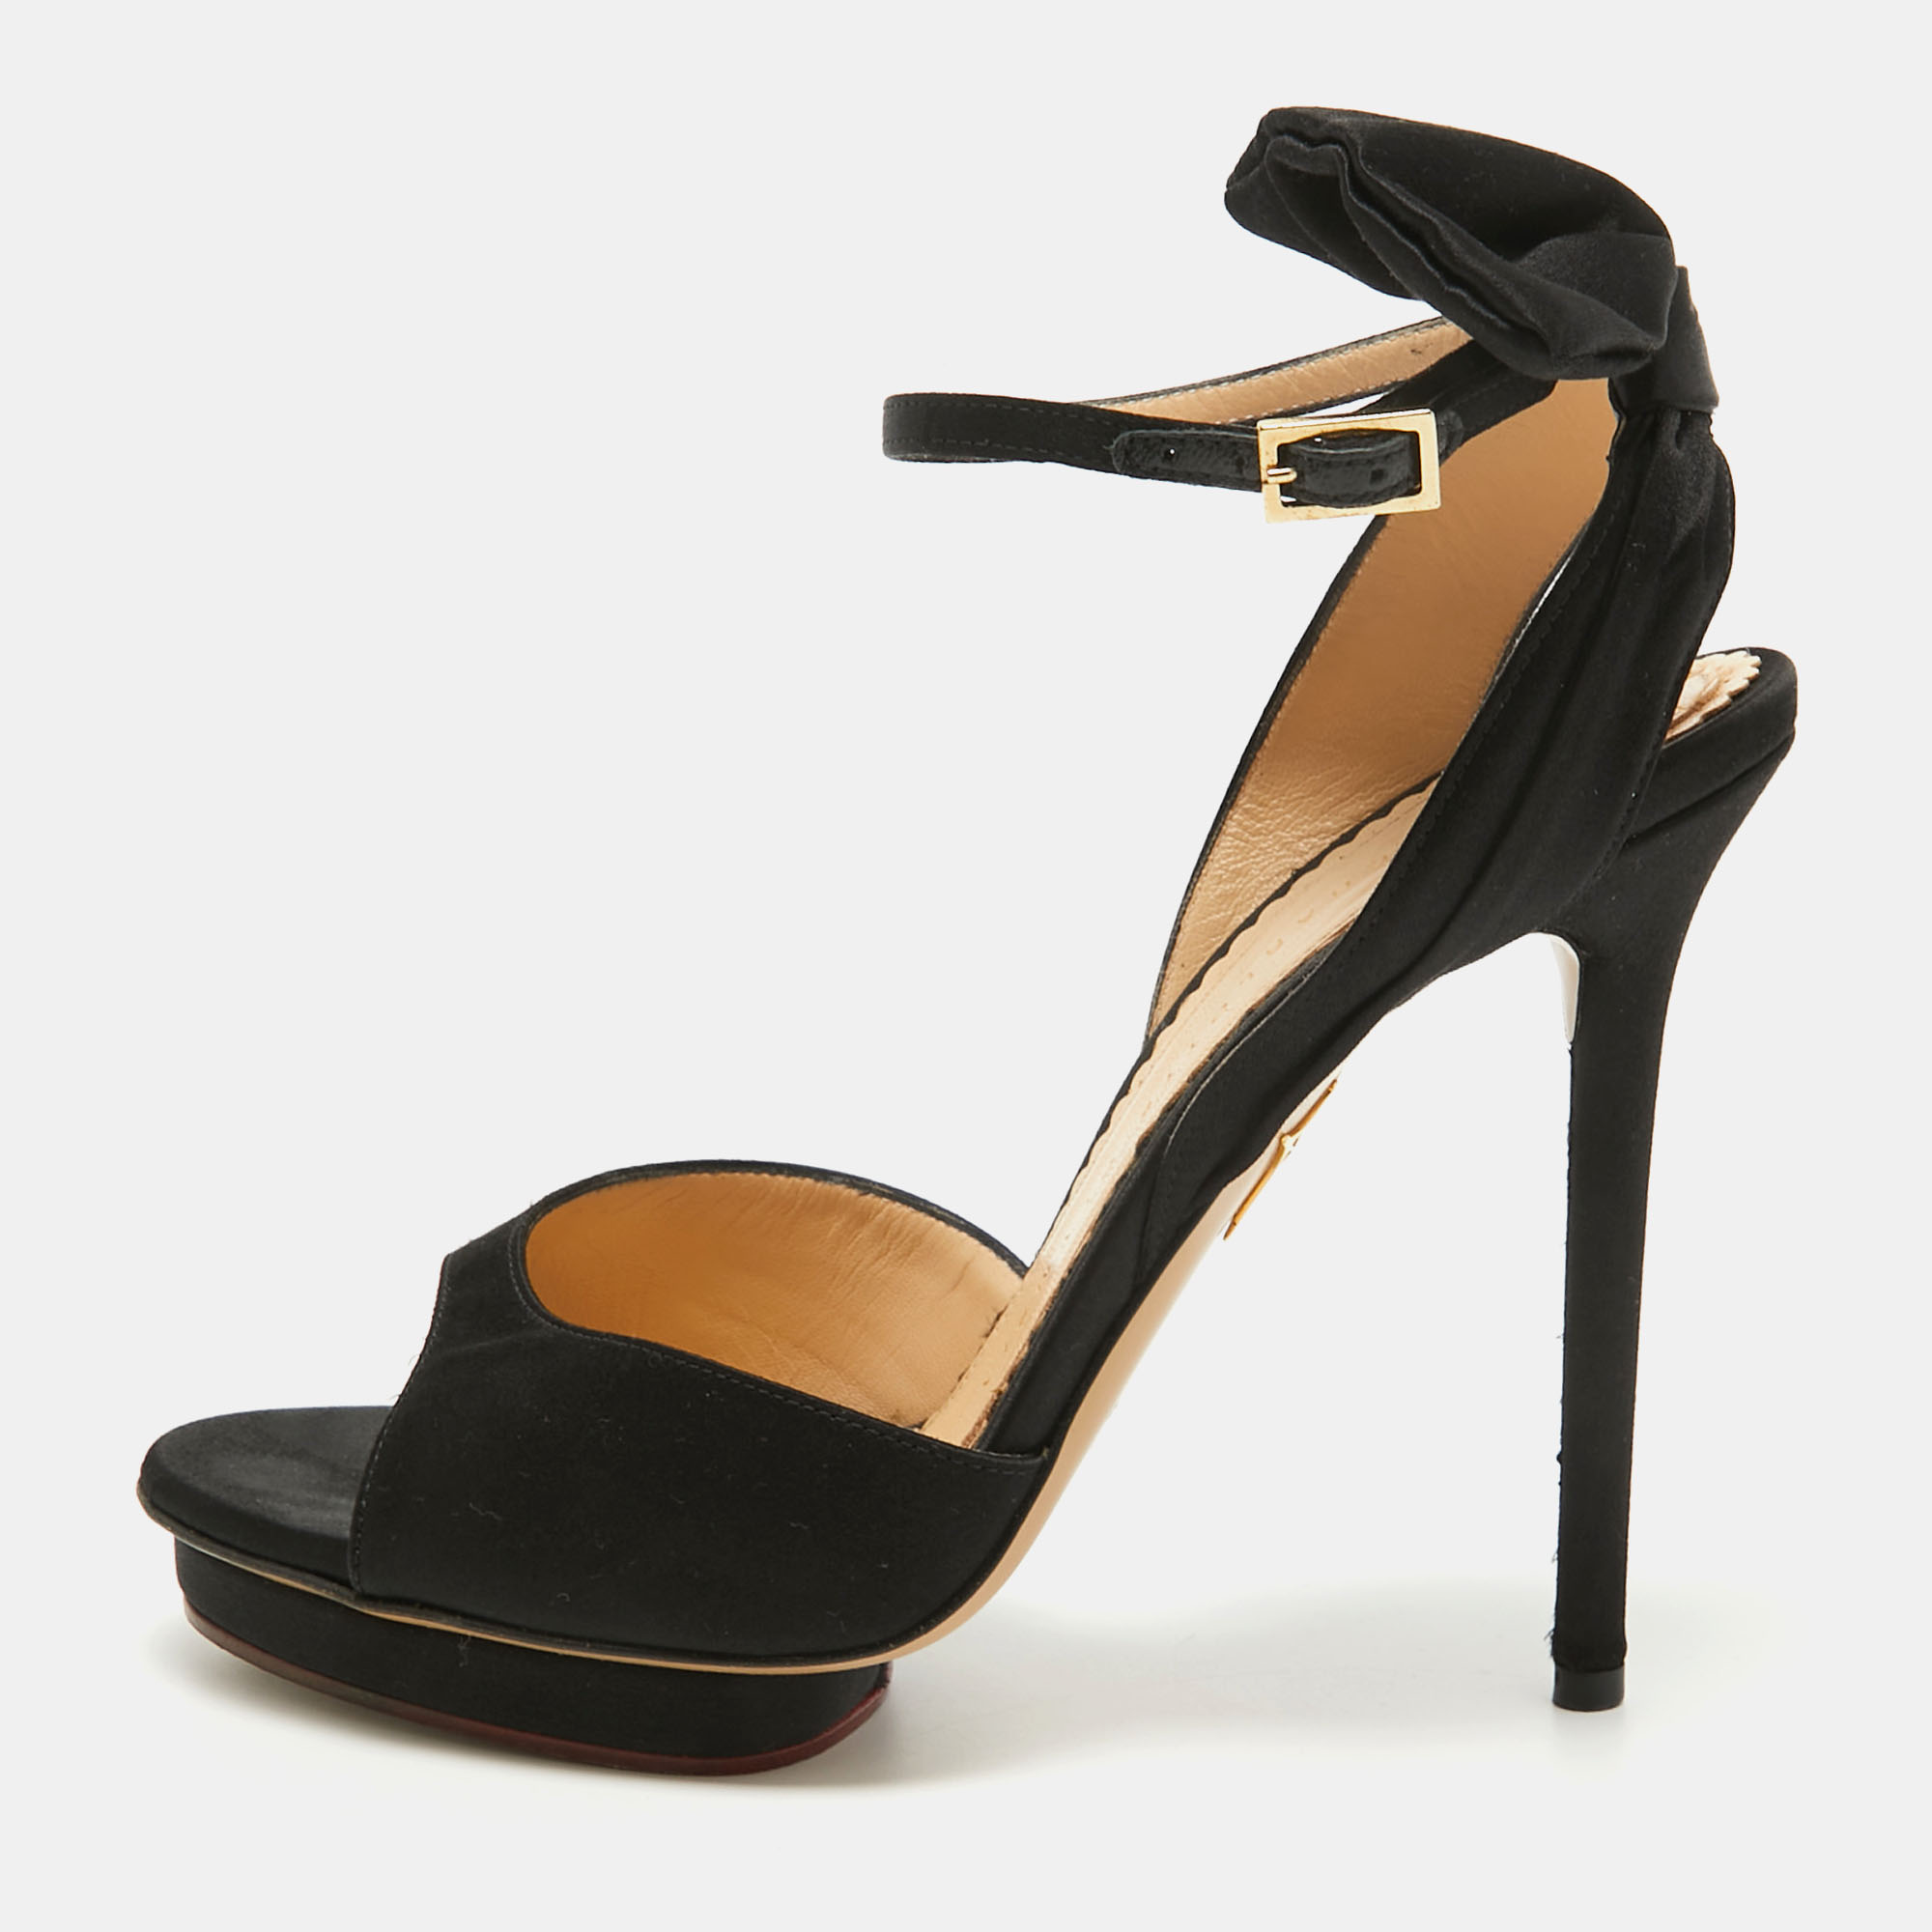 Pre-owned Charlotte Olympia Black Satin Wallace Sandals Size 38